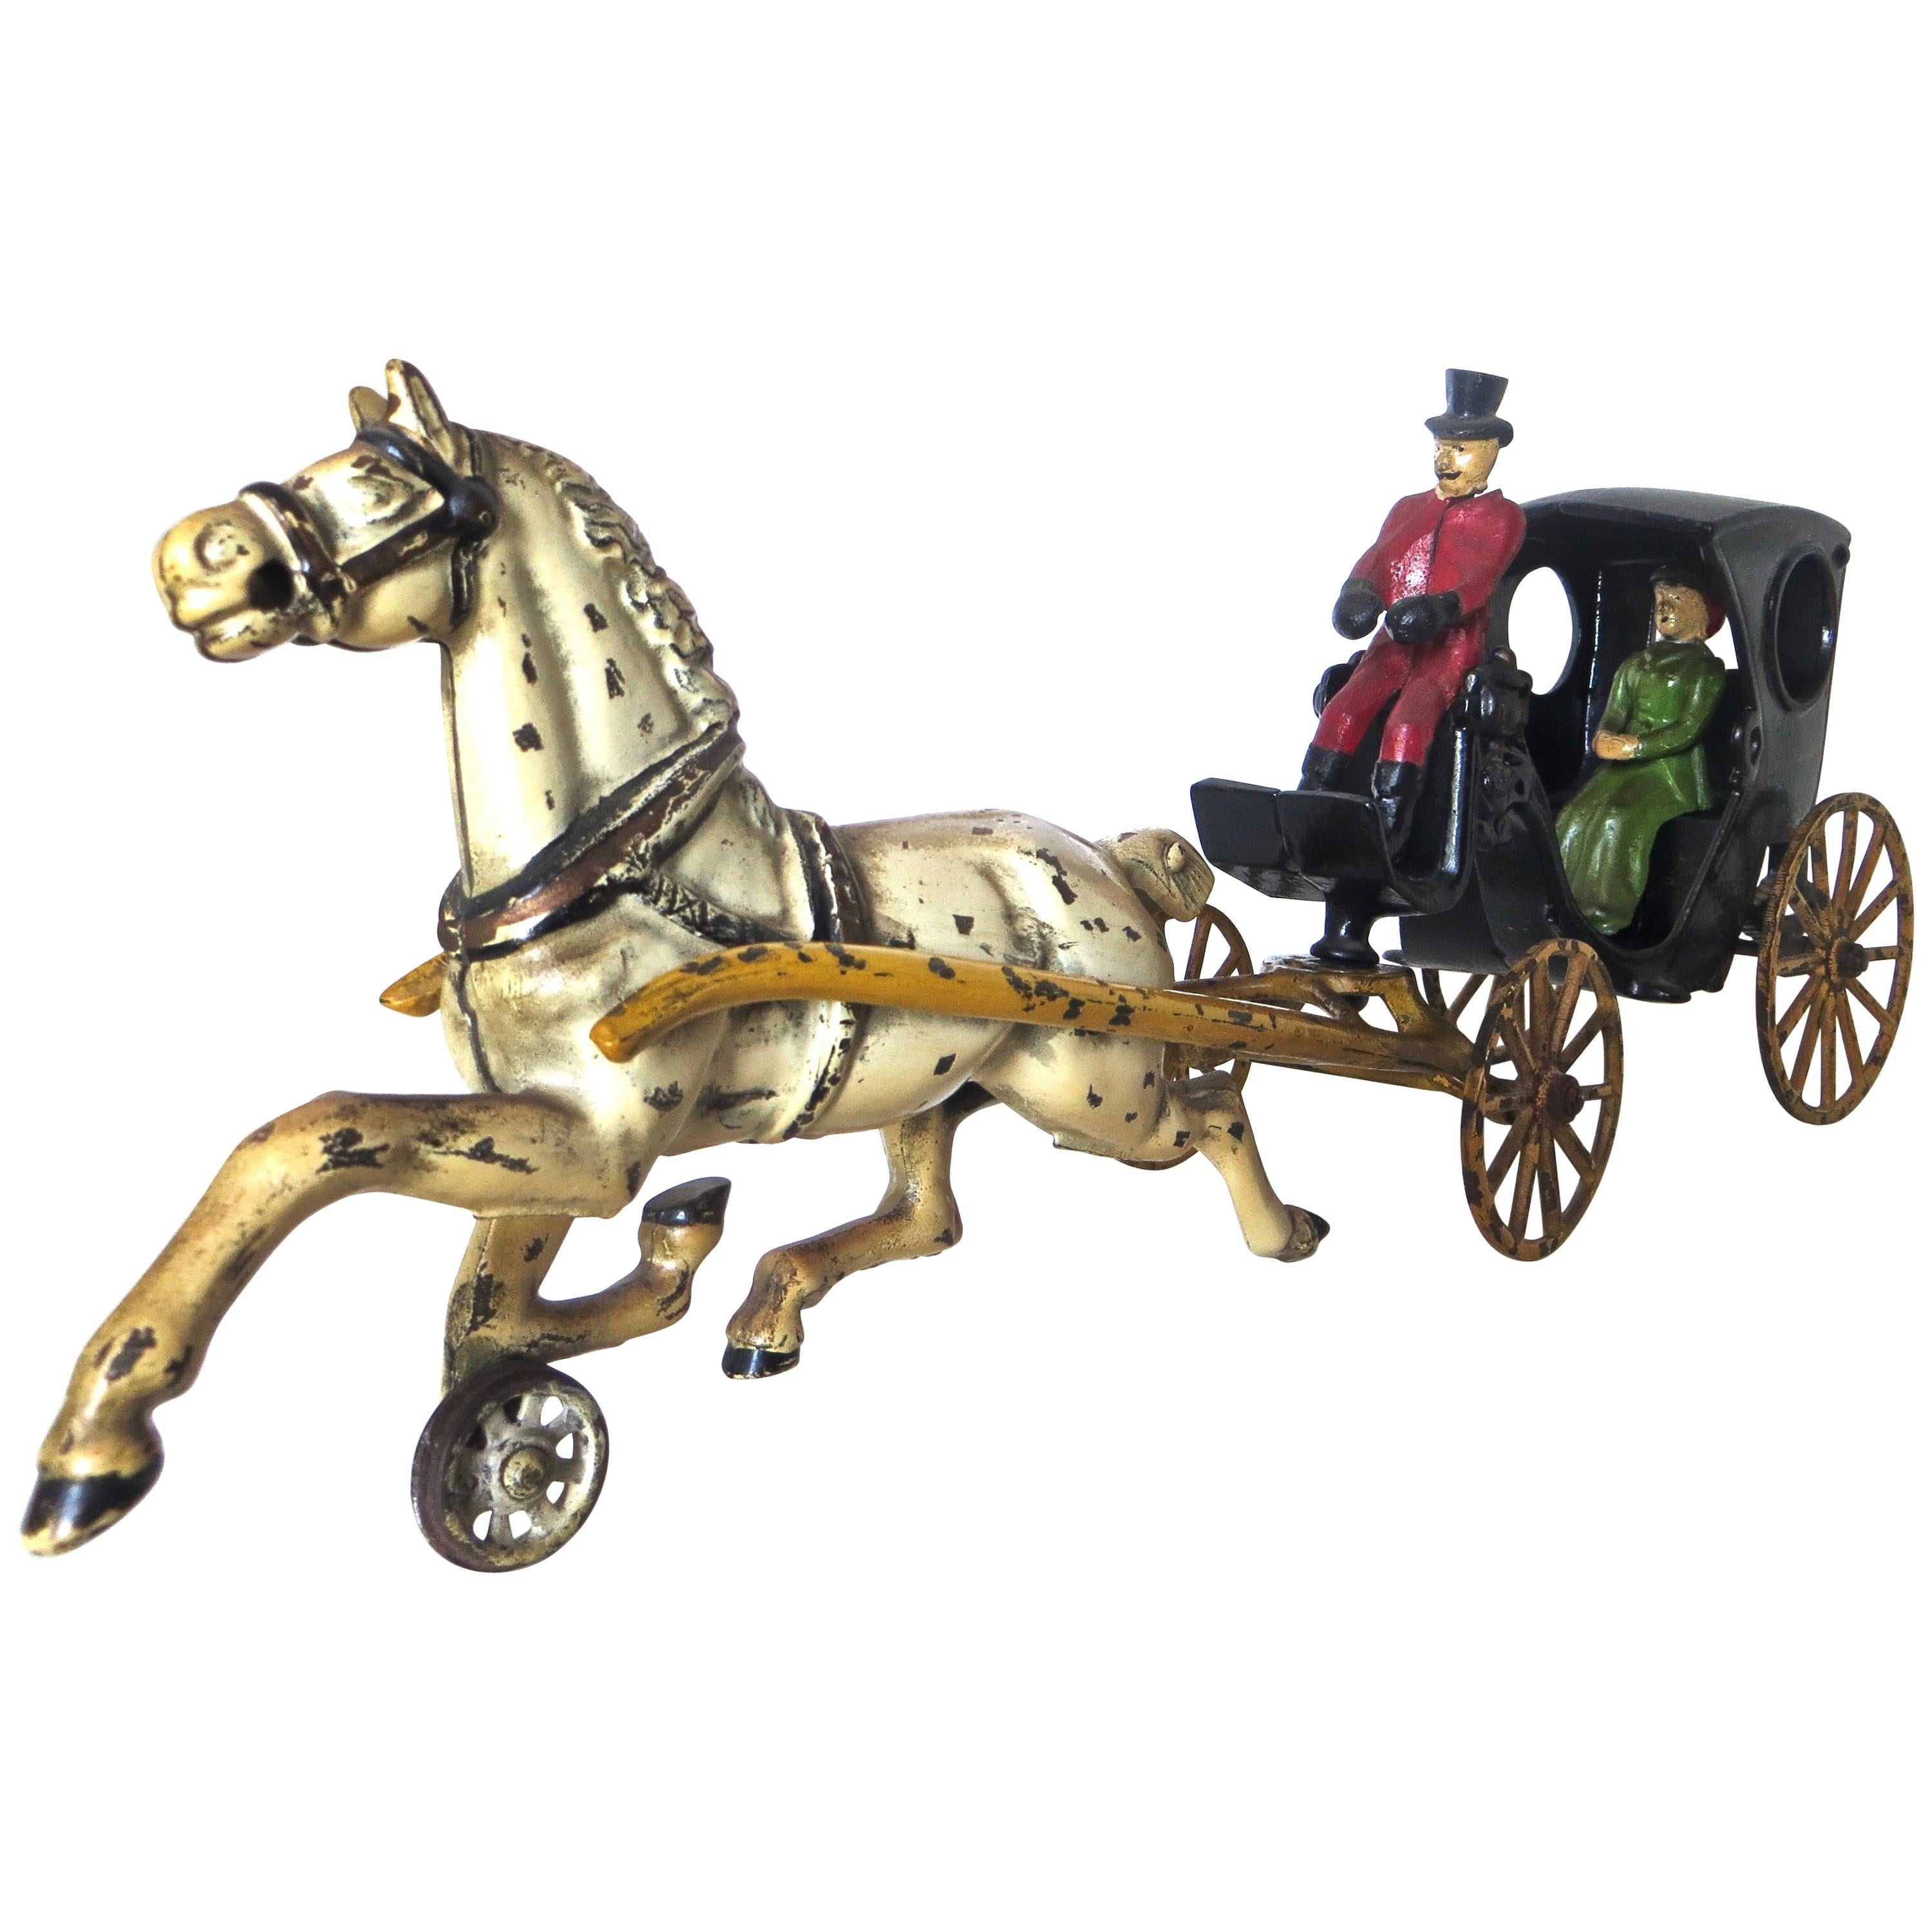 Late 19th Century "Cabriolet" Horse Drawn Hansom Cab Cast Iron Toy by Kenton